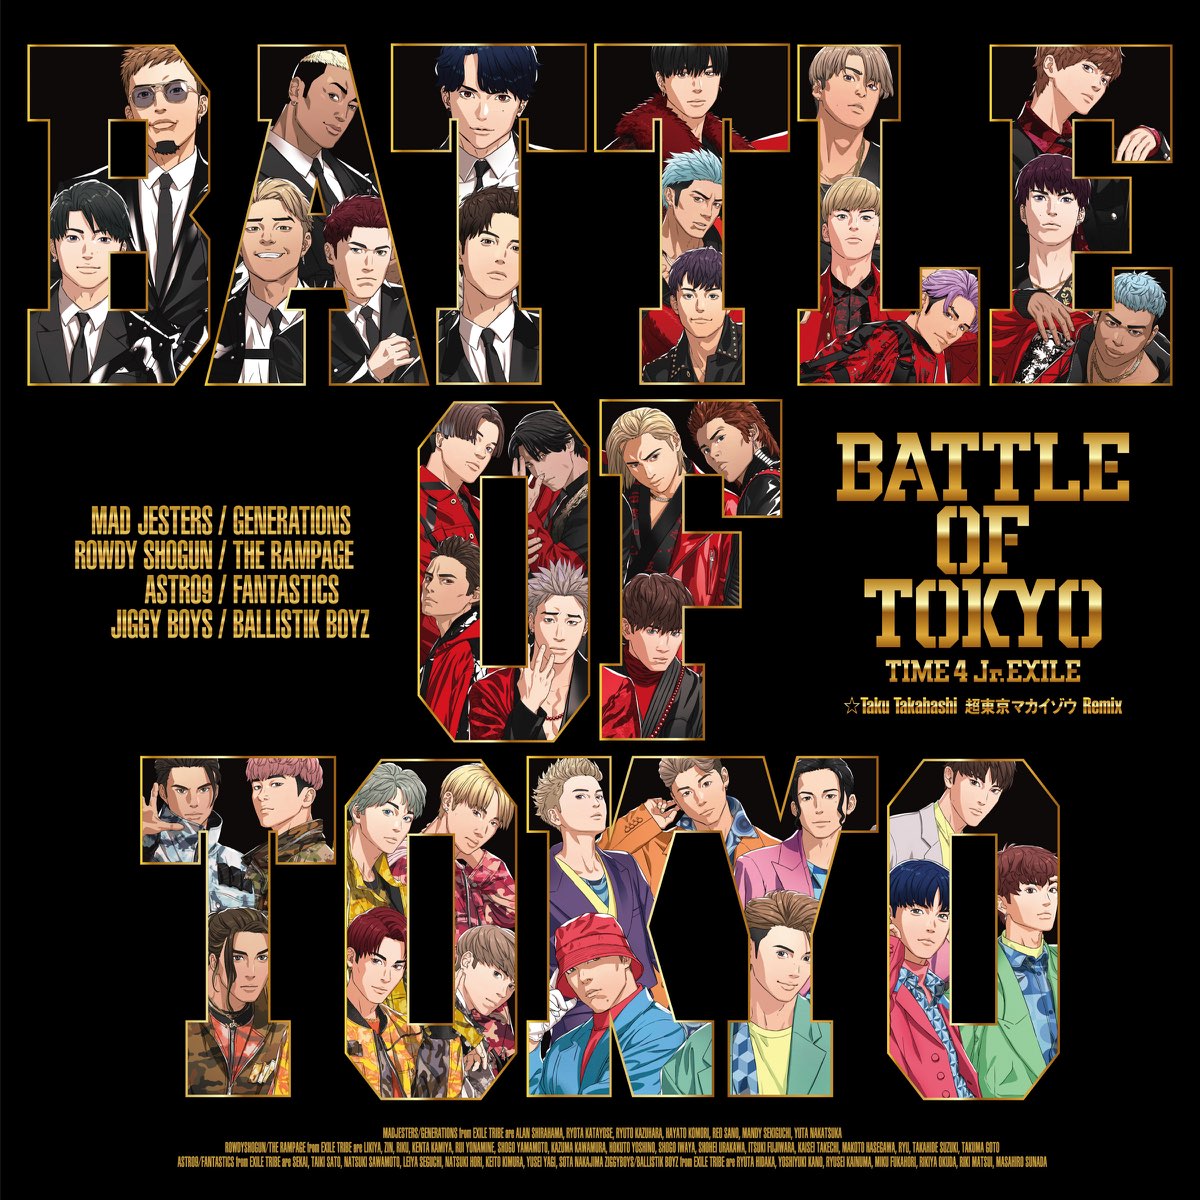 BATTLE OF TOKYO ～TIME 4 Jr.EXILE～ - EP - Album by GENERATIONS 